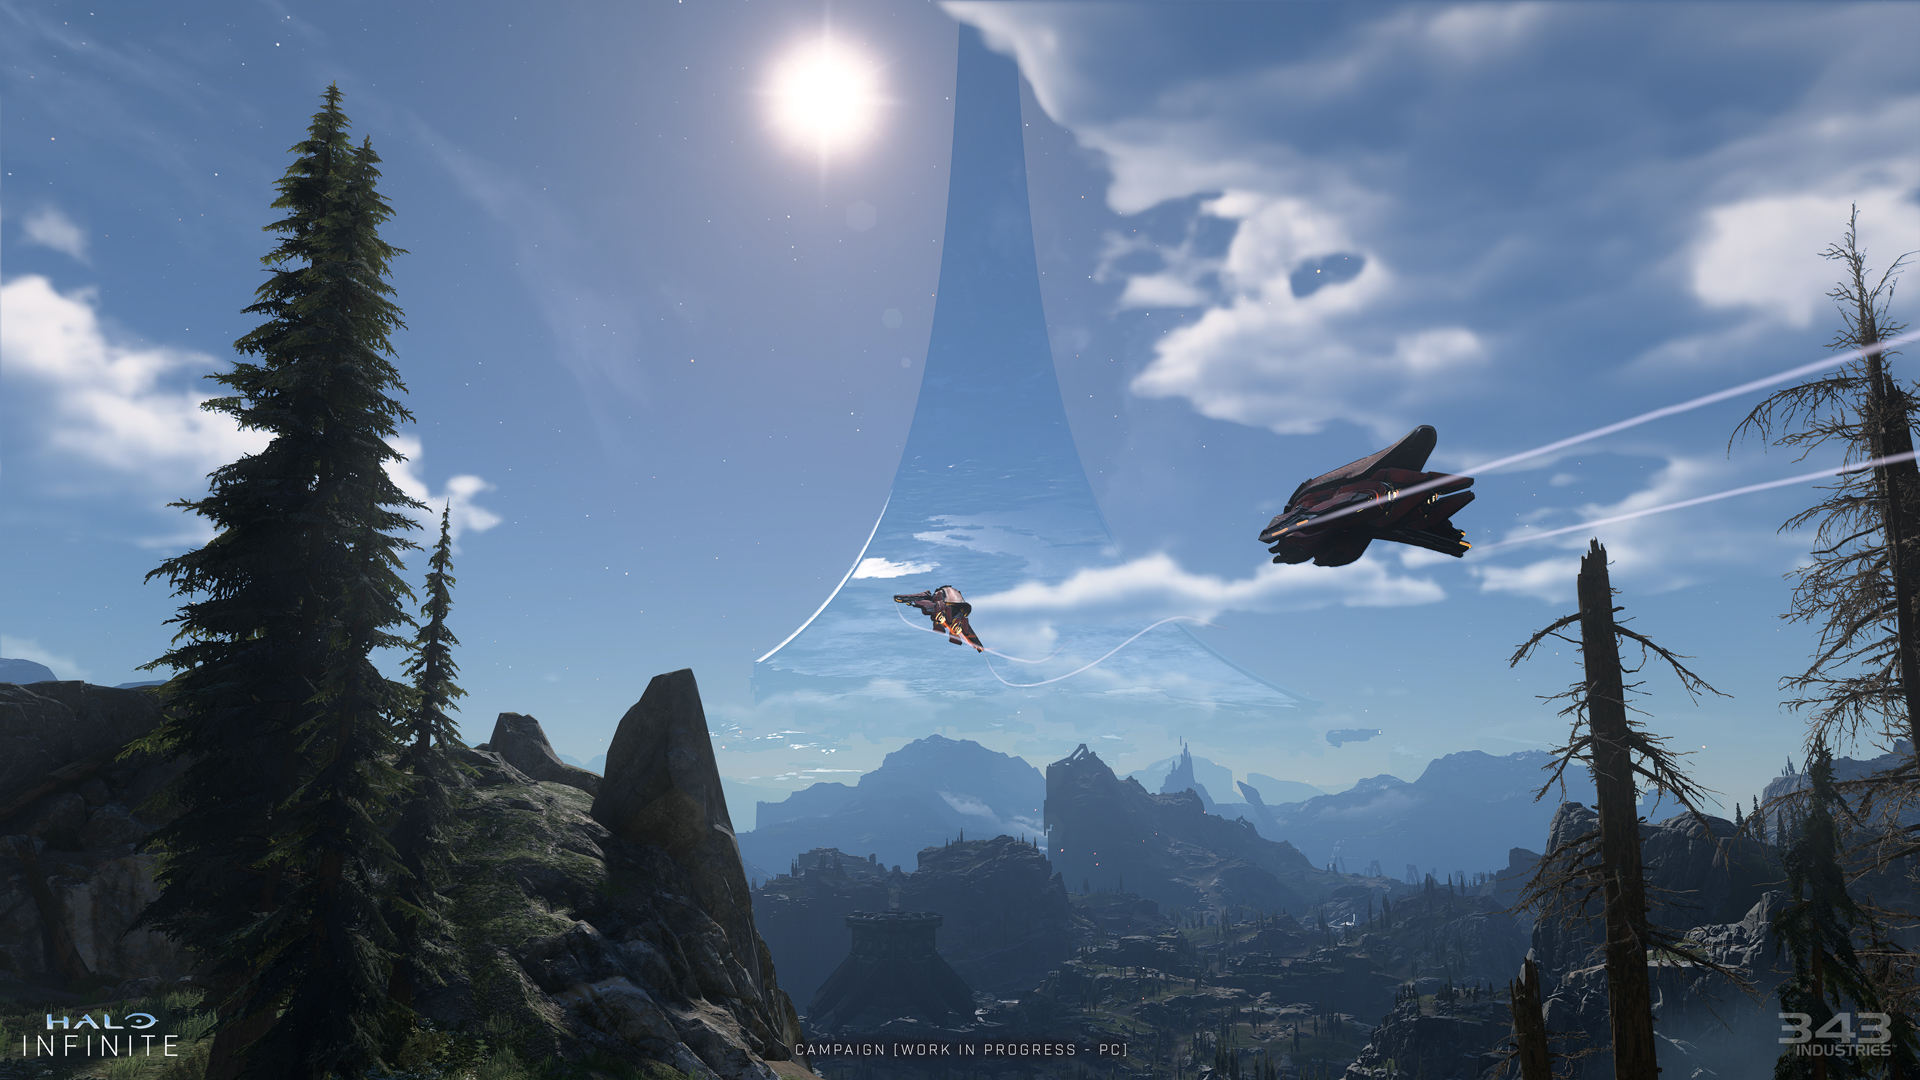 Halo Infinite screenshot showing improvements to the game